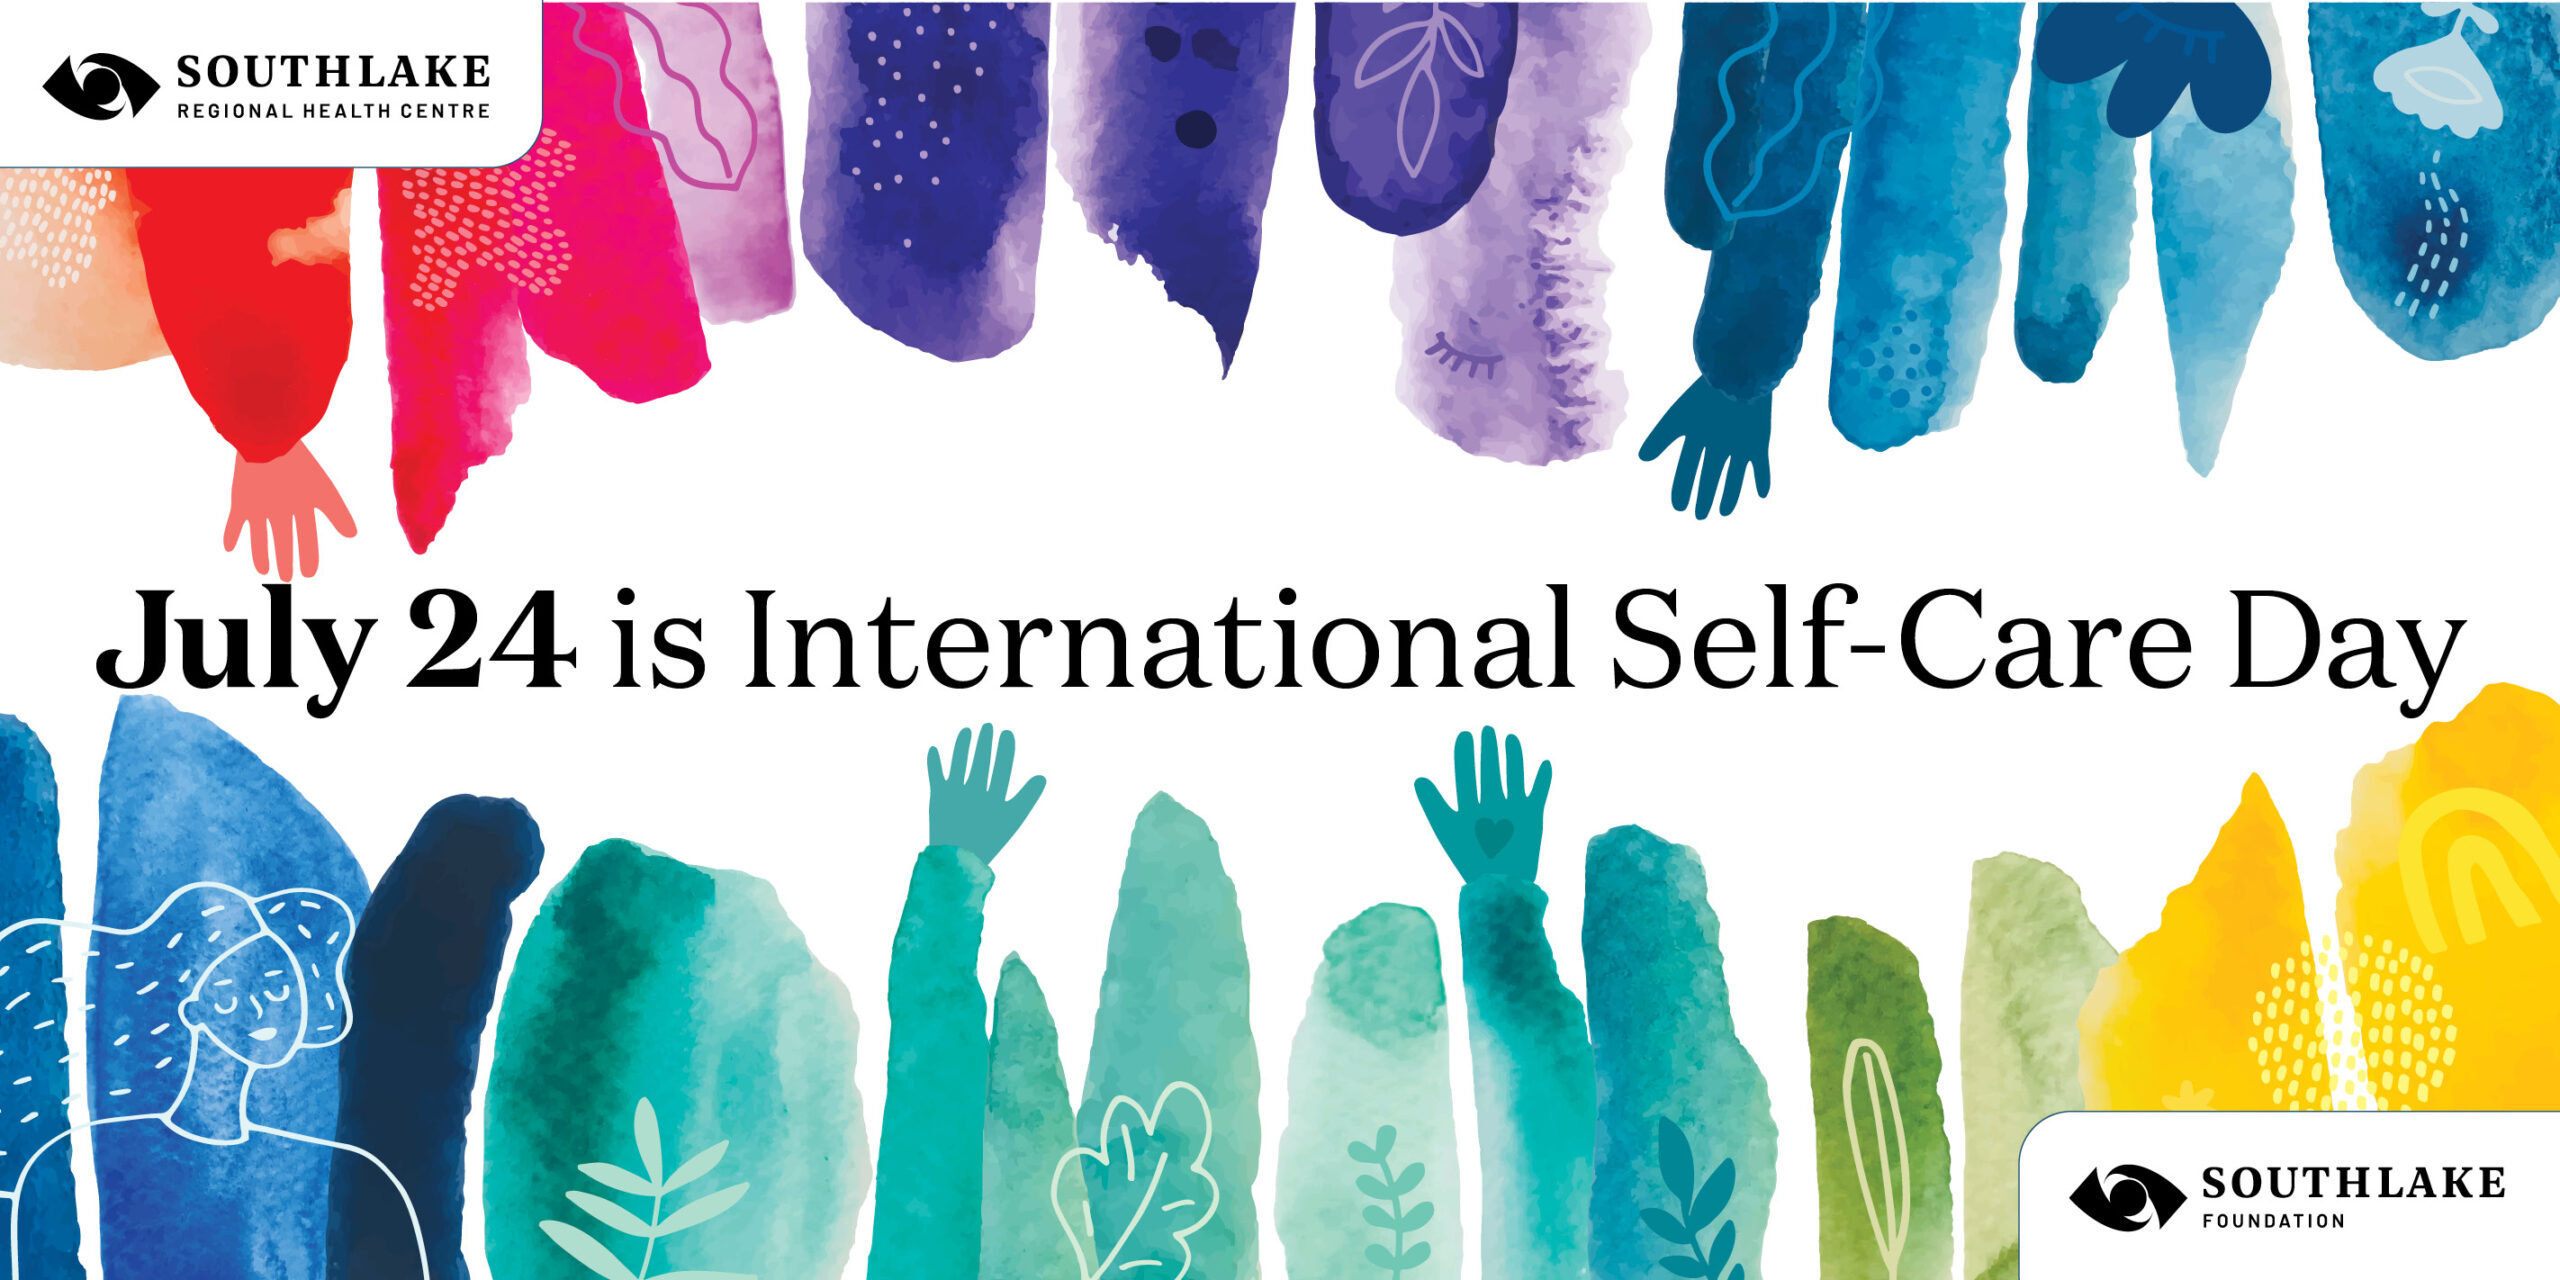 Show love to yourself on International SelfCare Day Southlake